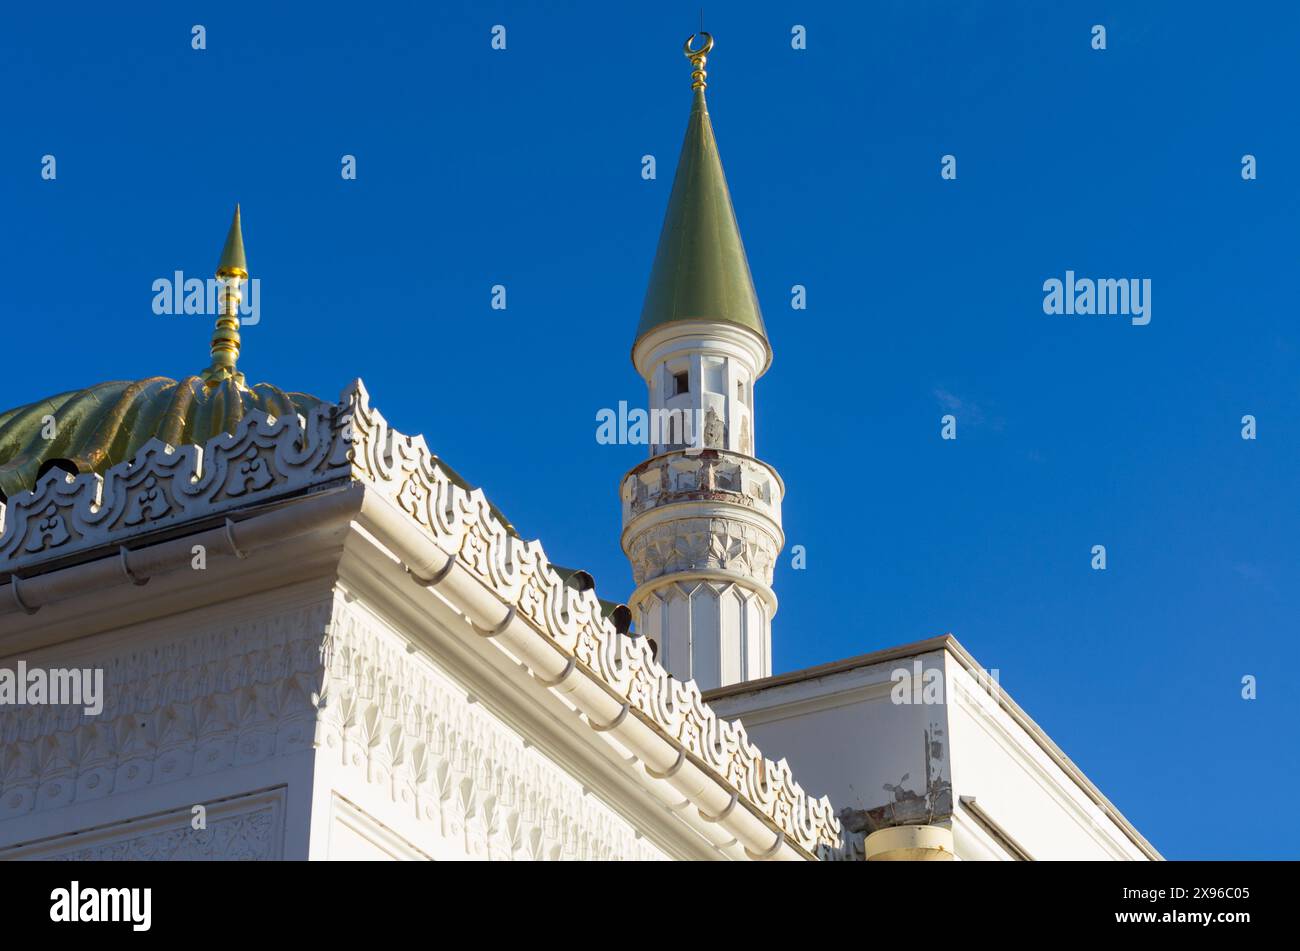 Minaret and golden dome with a spire above the Turkish Bath building (Tsarskoye Selo, St. Petersburg, Russia) Stock Photo